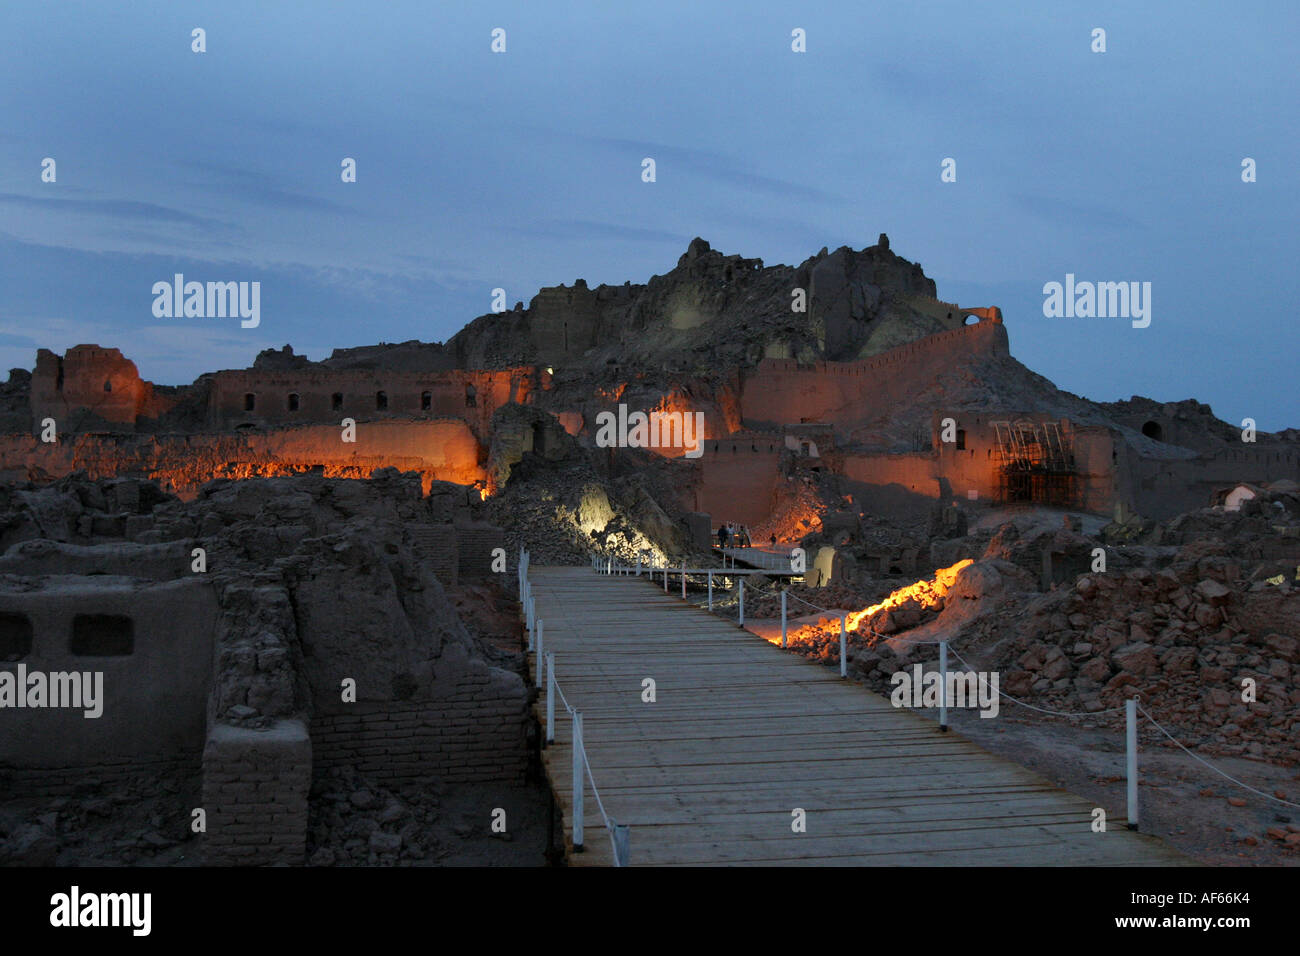 View of the old citadel (Arg e Bam) at night in Bam a year after the earthquake that destroyed the whole city, Iran, November 20 Stock Photo